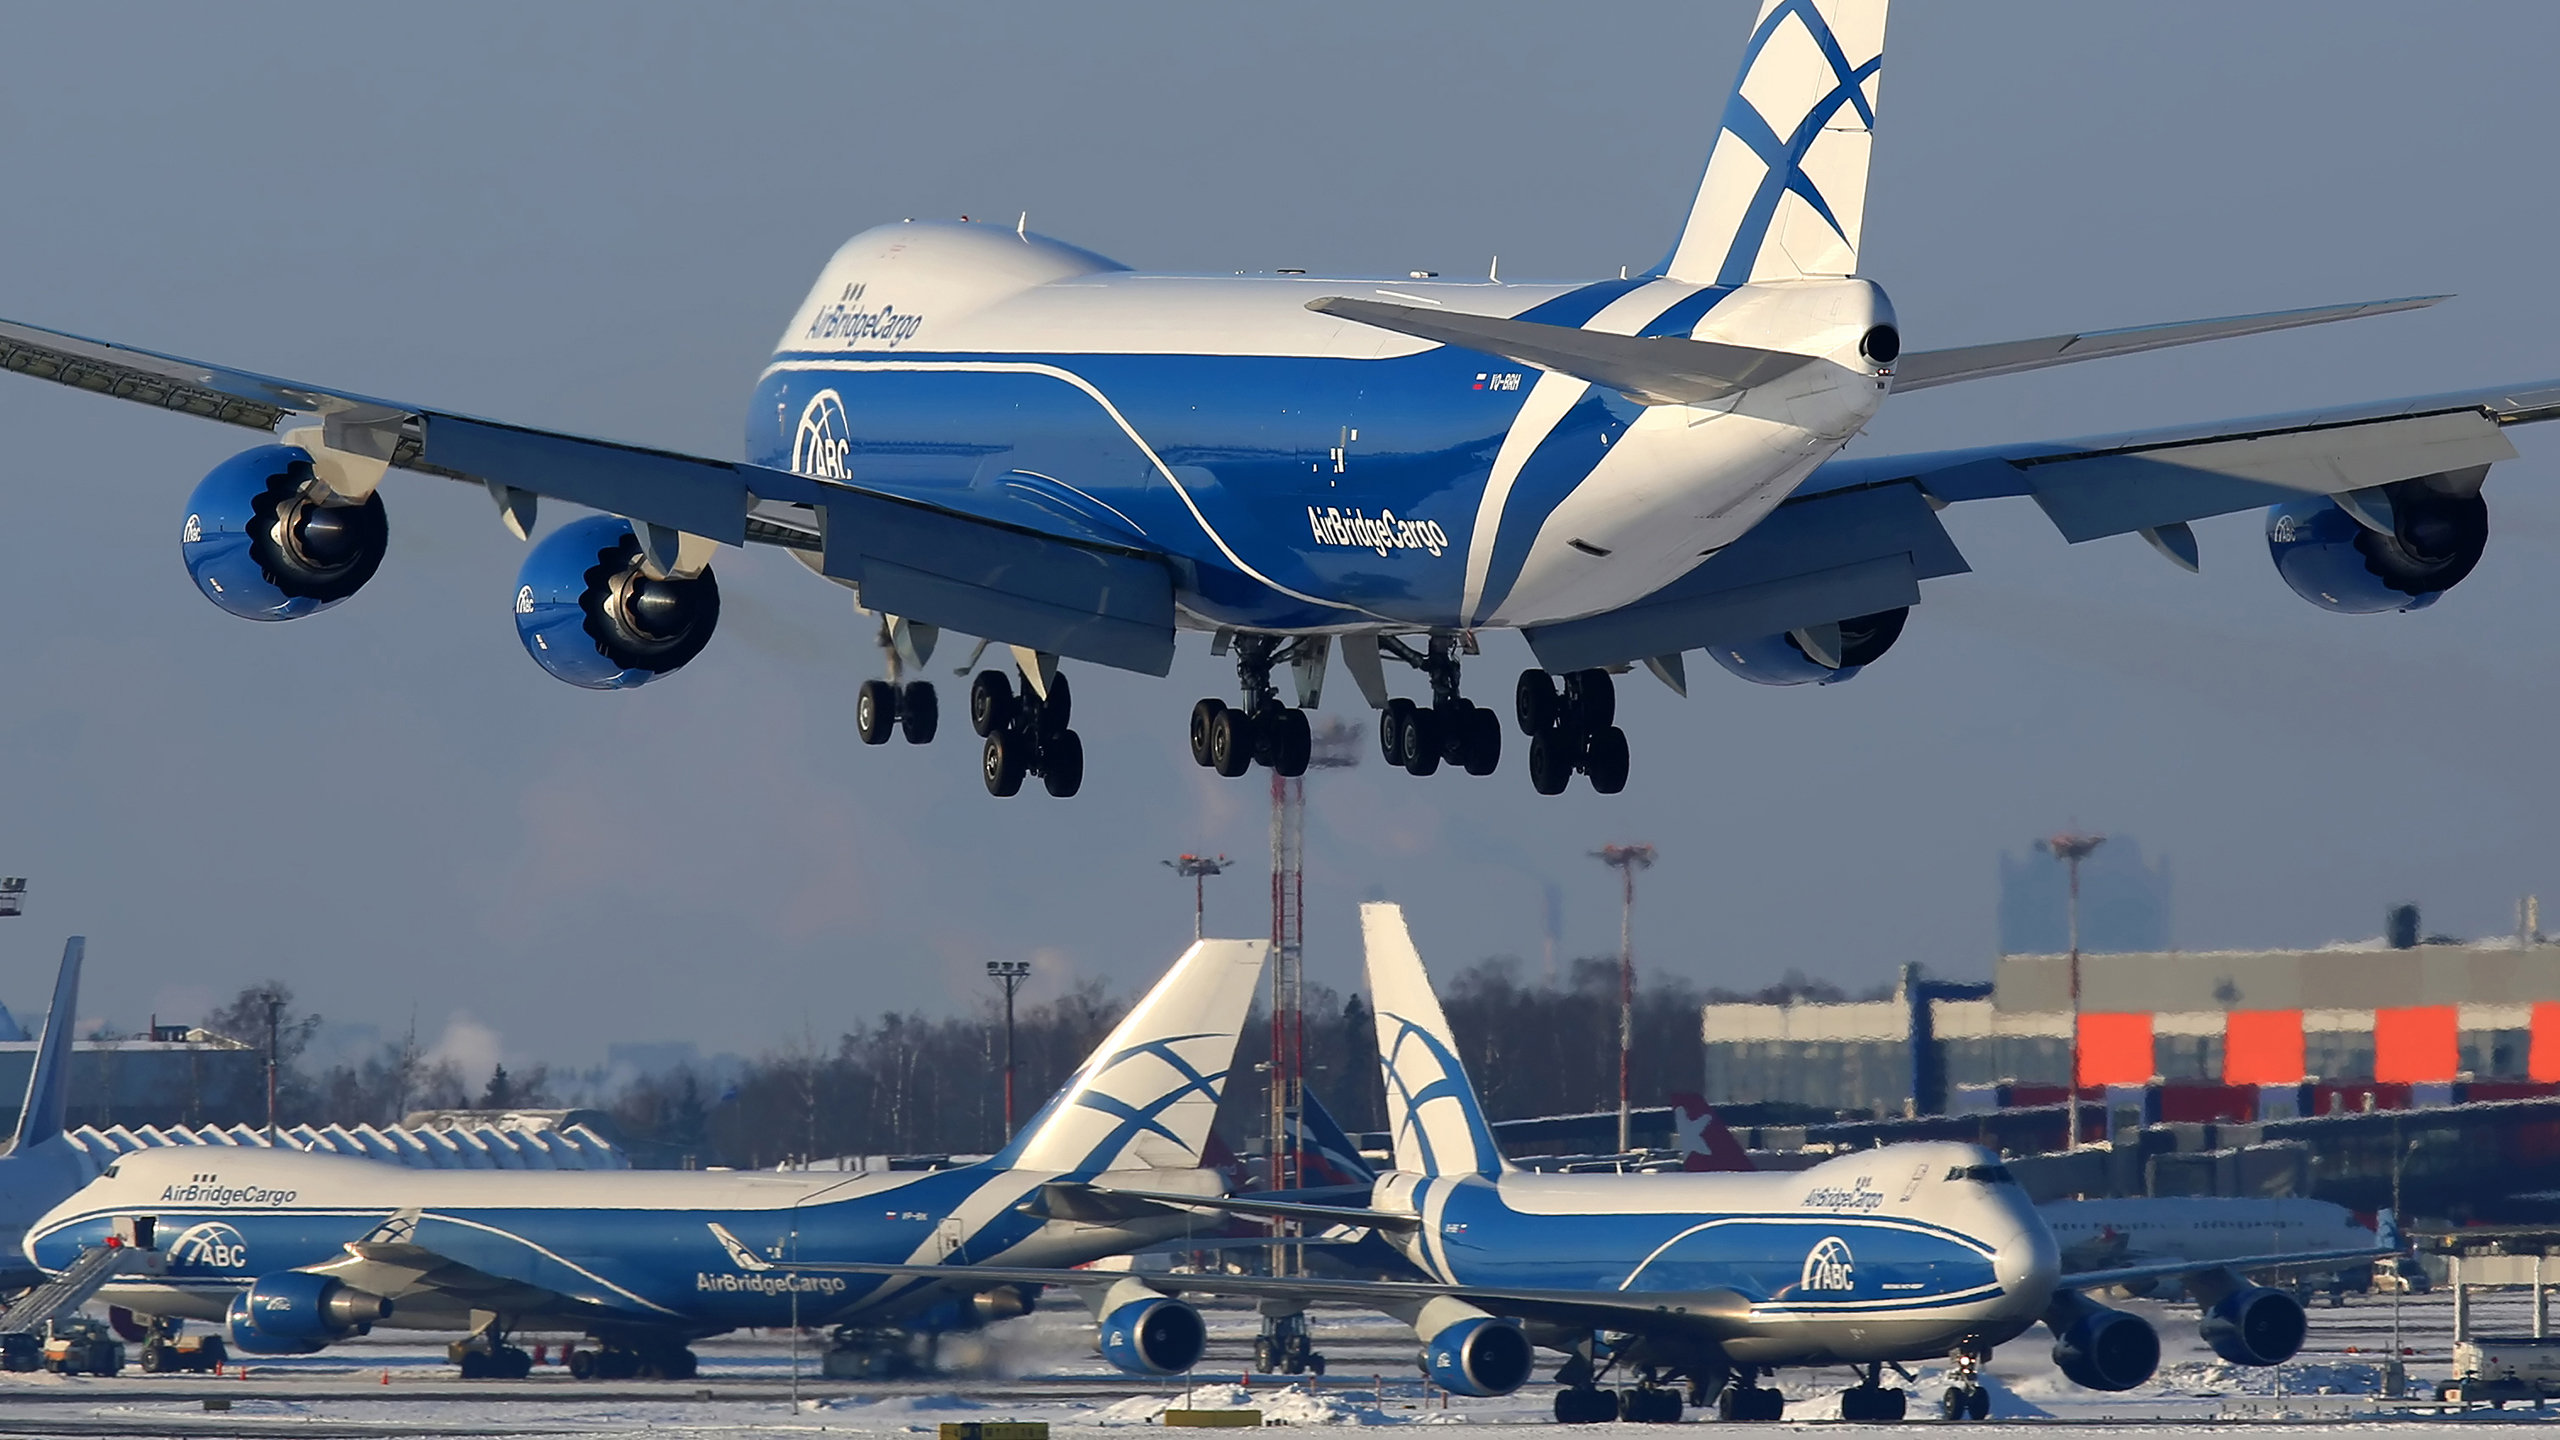 General 2560x1440 Boeing 747 airplane aircraft cargo airport vehicle Boeing American aircraft